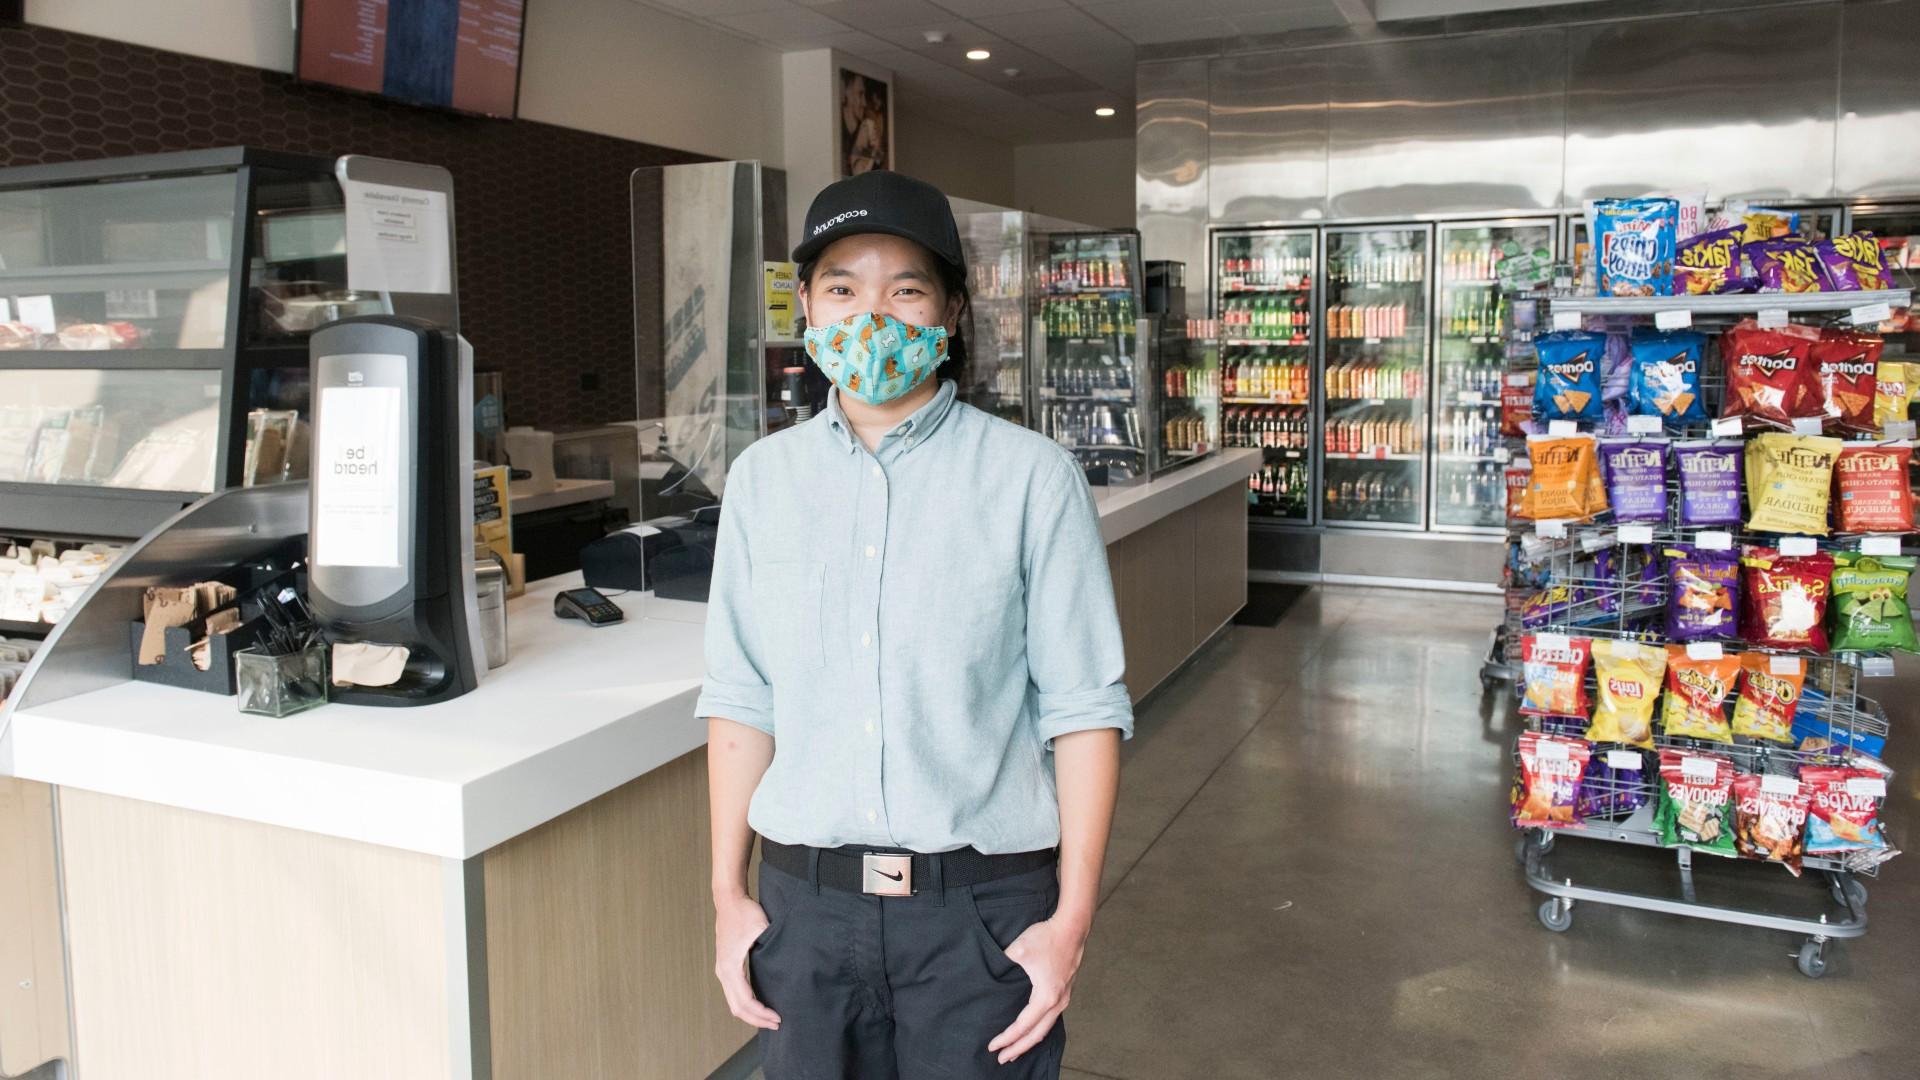 Person with a baseball cap and a facial covering poses for a photo in a convenience store.